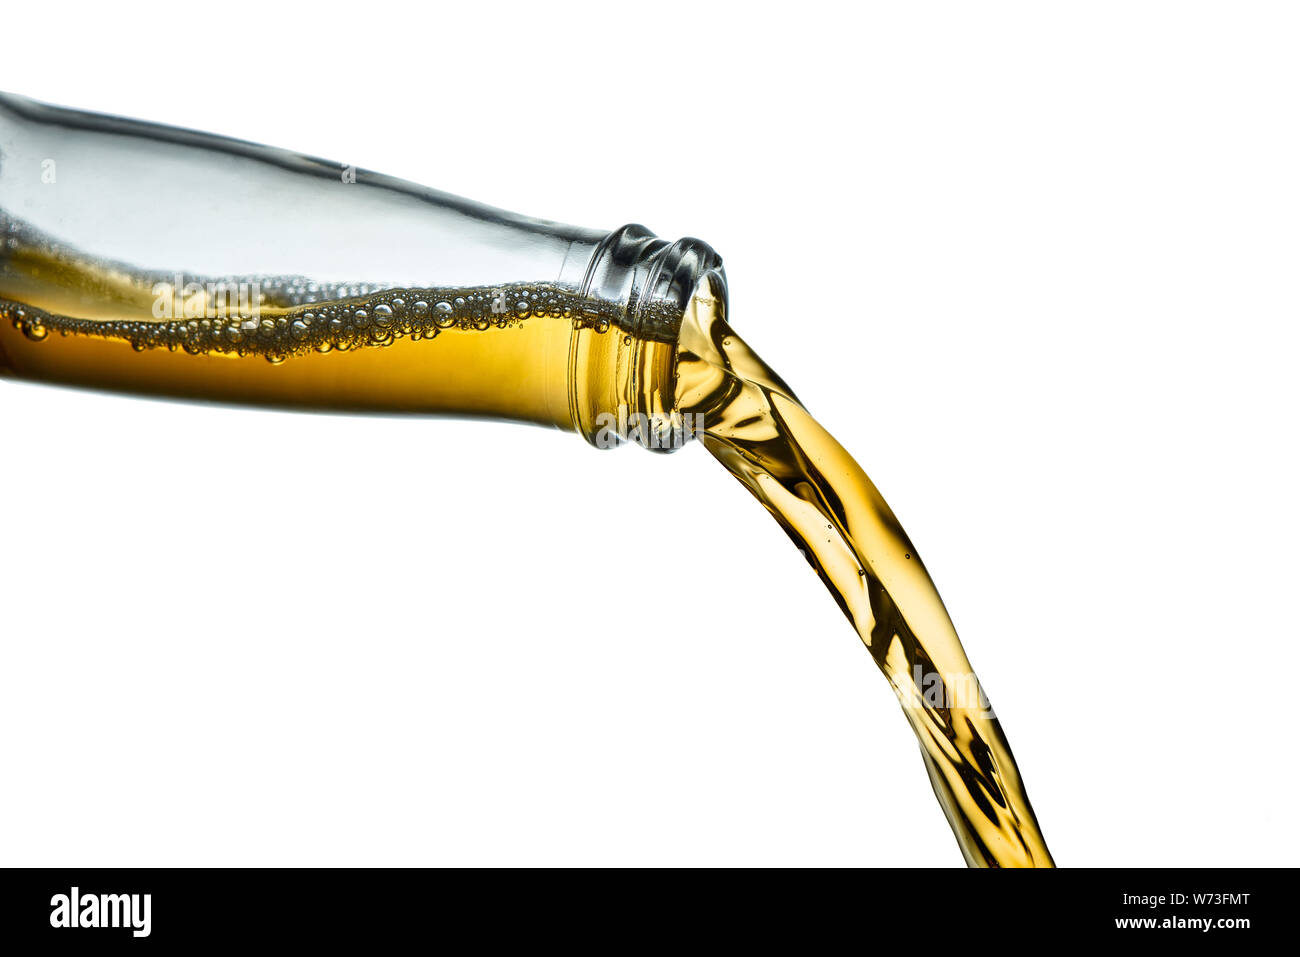 Golden lager pouring from clear beer bottle. Stop action closeup on white background. Stock Photo